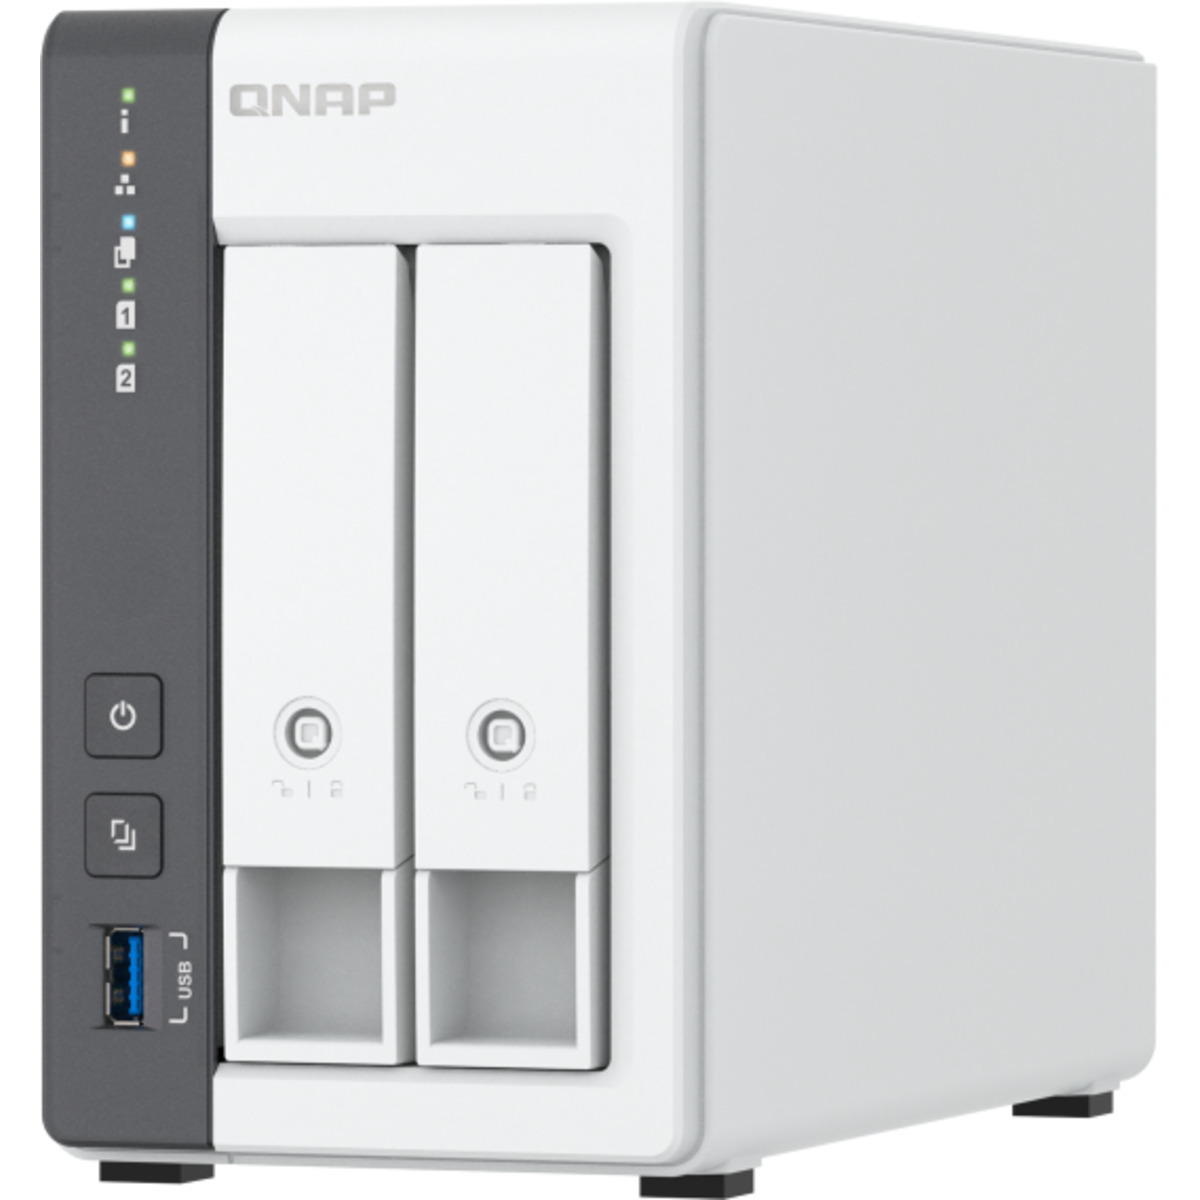 QNAP TS-216G 18tb 2-Bay Desktop Personal / Basic Home / Small Office NAS - Network Attached Storage Device 1x18tb Seagate IronWolf Pro ST18000NT001 3.5 7200rpm SATA 6Gb/s HDD NAS Class Drives Installed - Burn-In Tested TS-216G